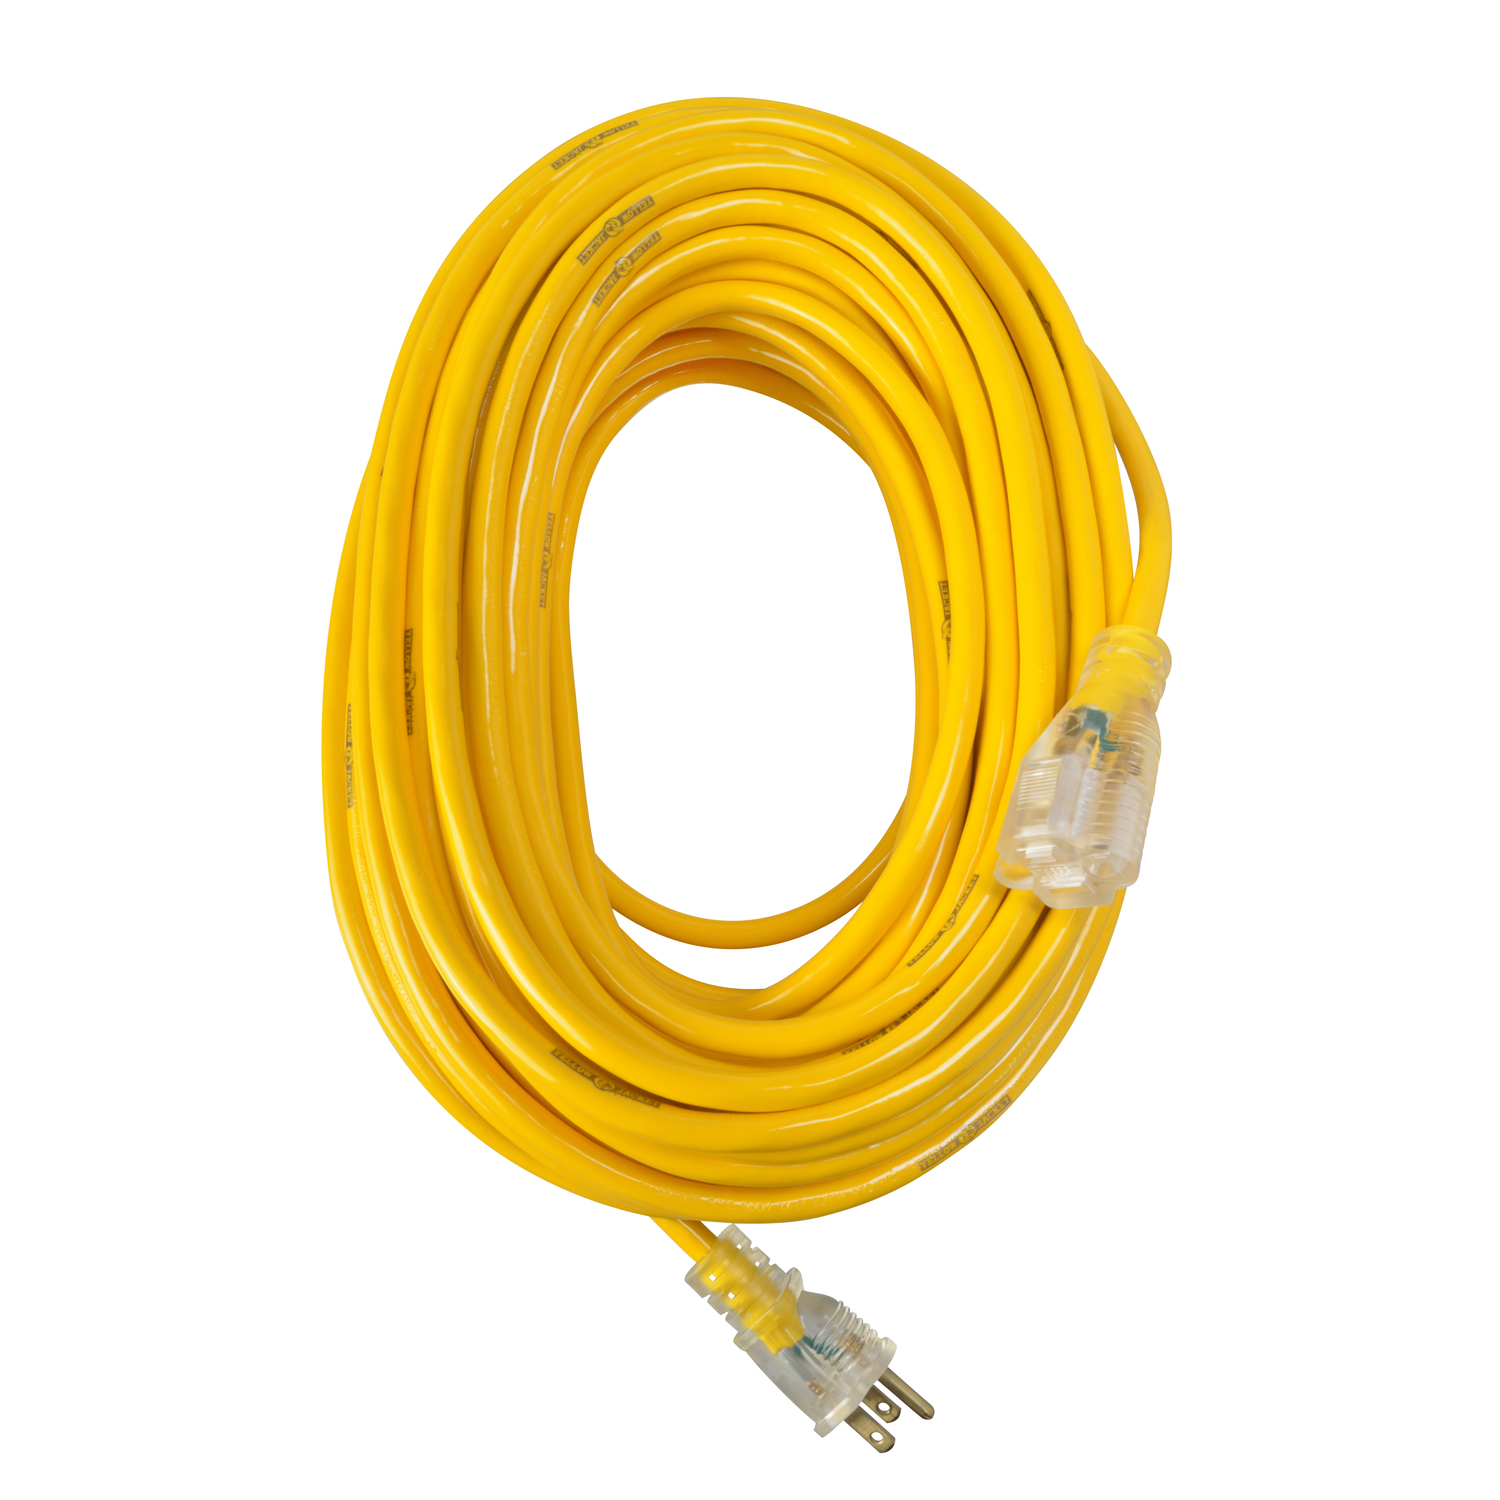 Photos - Surge Protector / Extension Lead Yellow Jacket Outdoor 100 ft. L Yellow Extension Cord 12/3 SJTW 2885AC